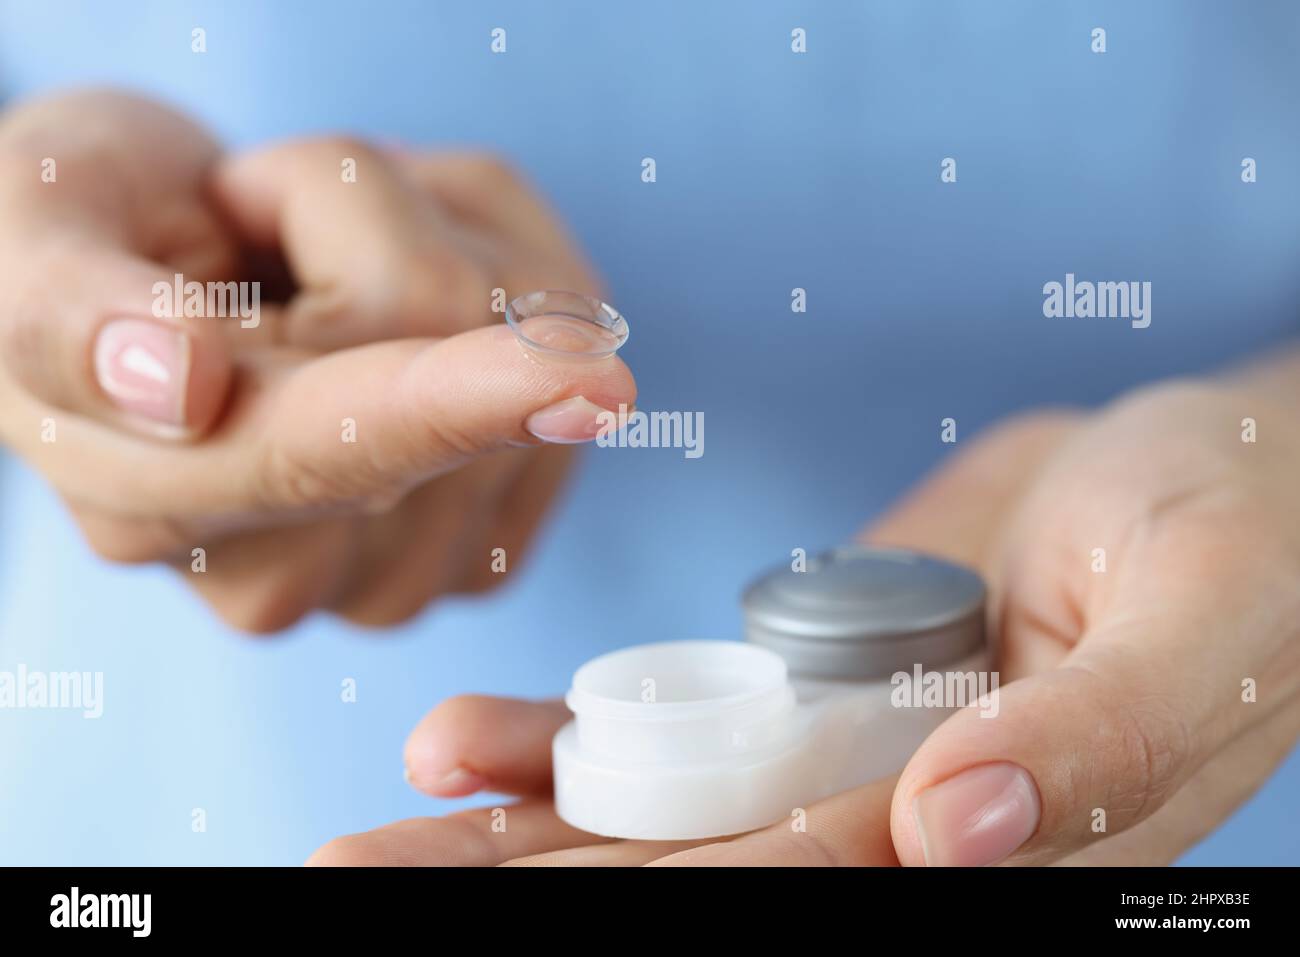 Contact lenses for vision and a container in female hands, blurry Stock Photo